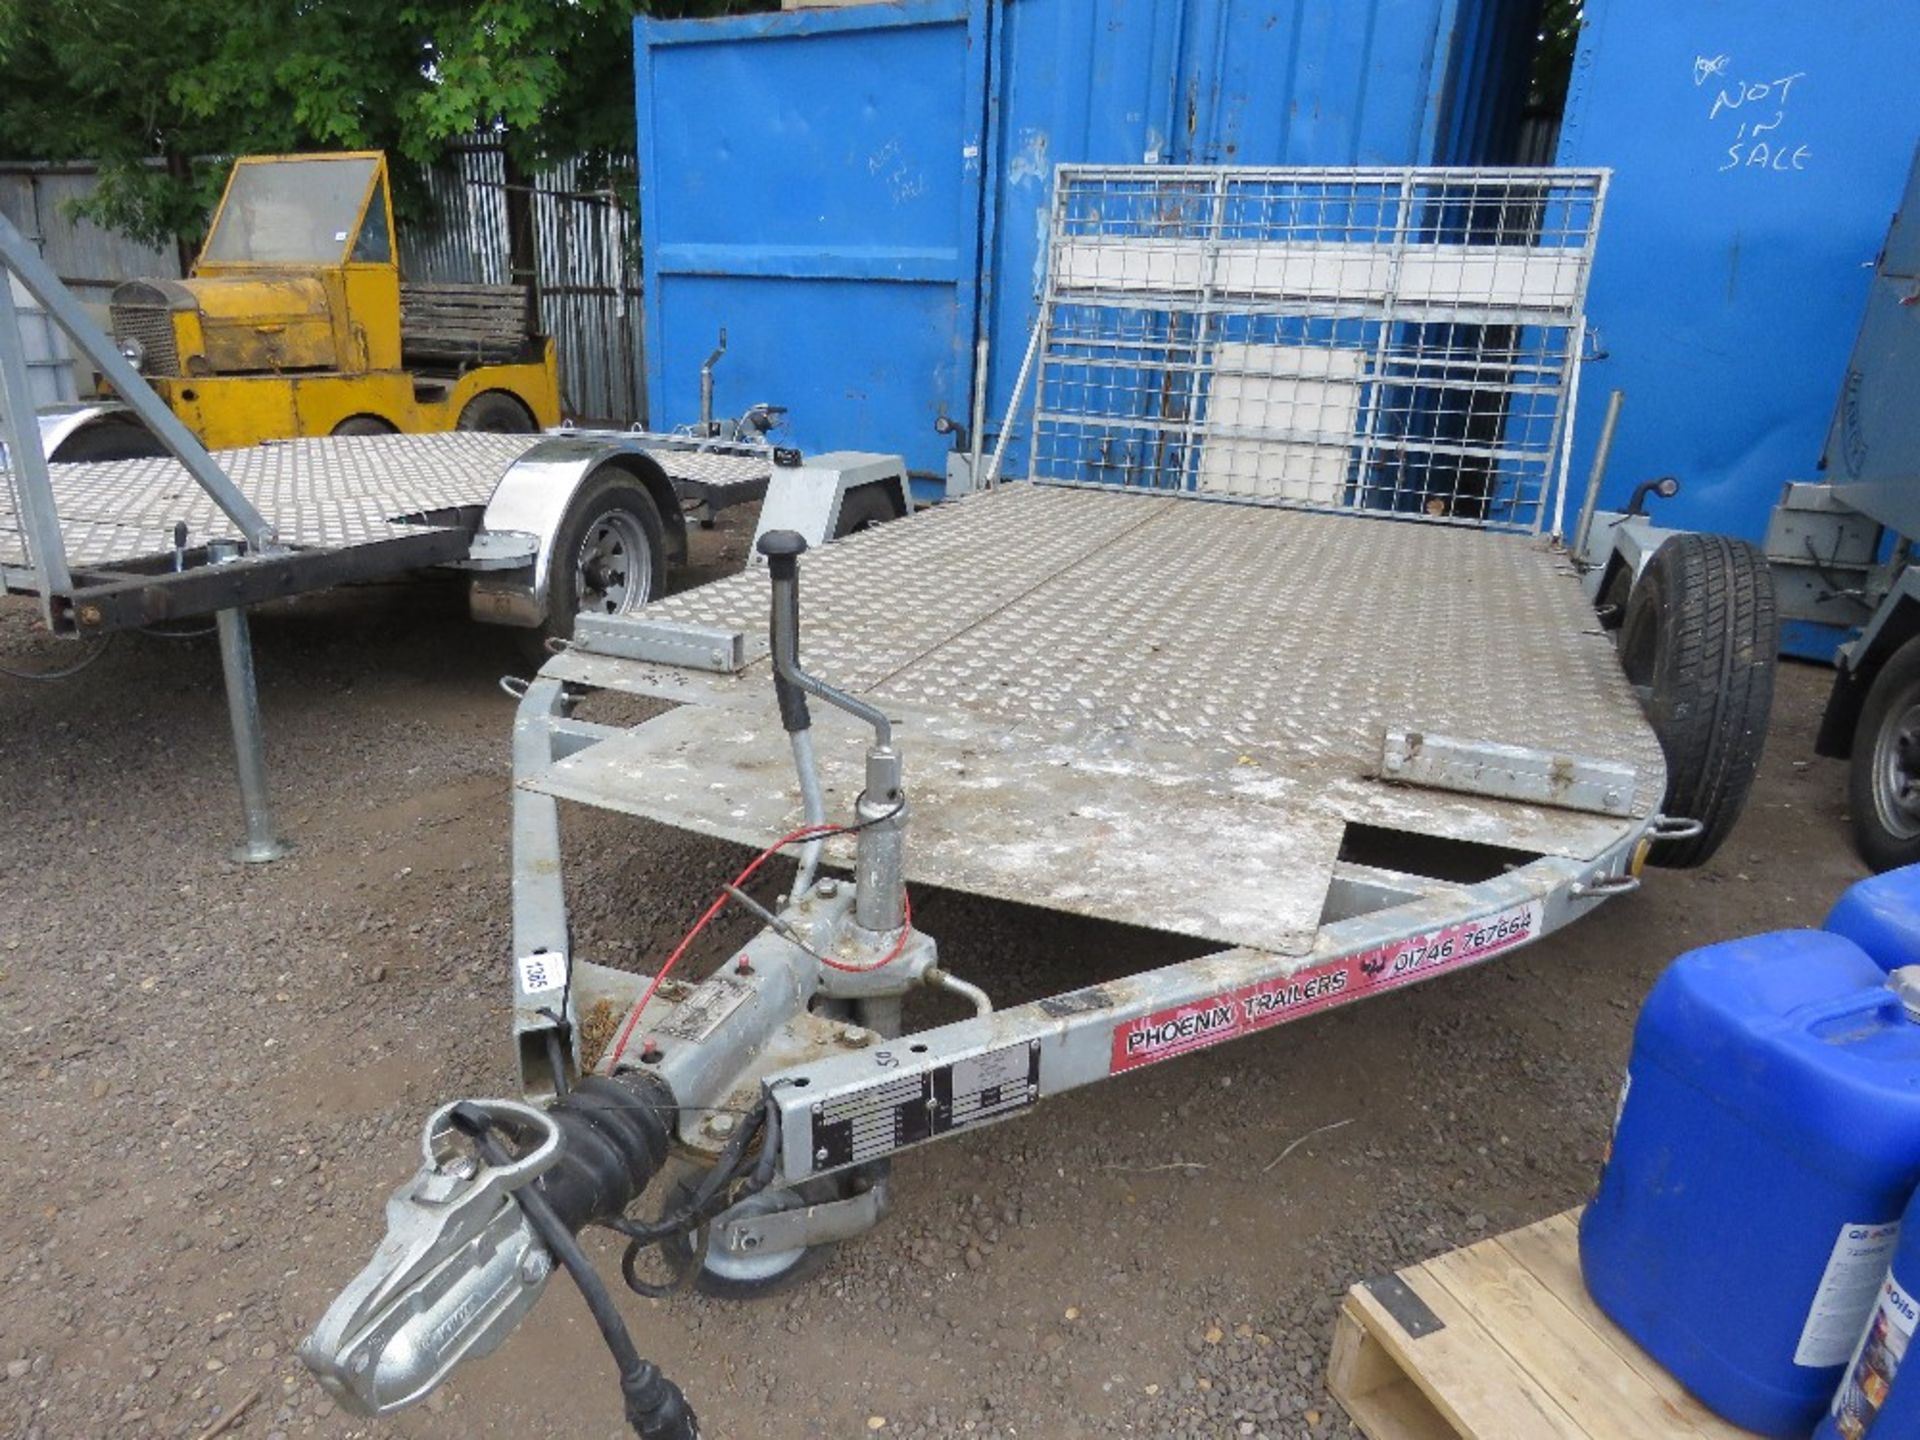 SINGLE AXLED QUAD BIKE / FLAT TRAILER 1.8M WIDE X 2.4M LENGTH BED APPROX. SOURCED FROM LIQUIDATION. - Image 2 of 5